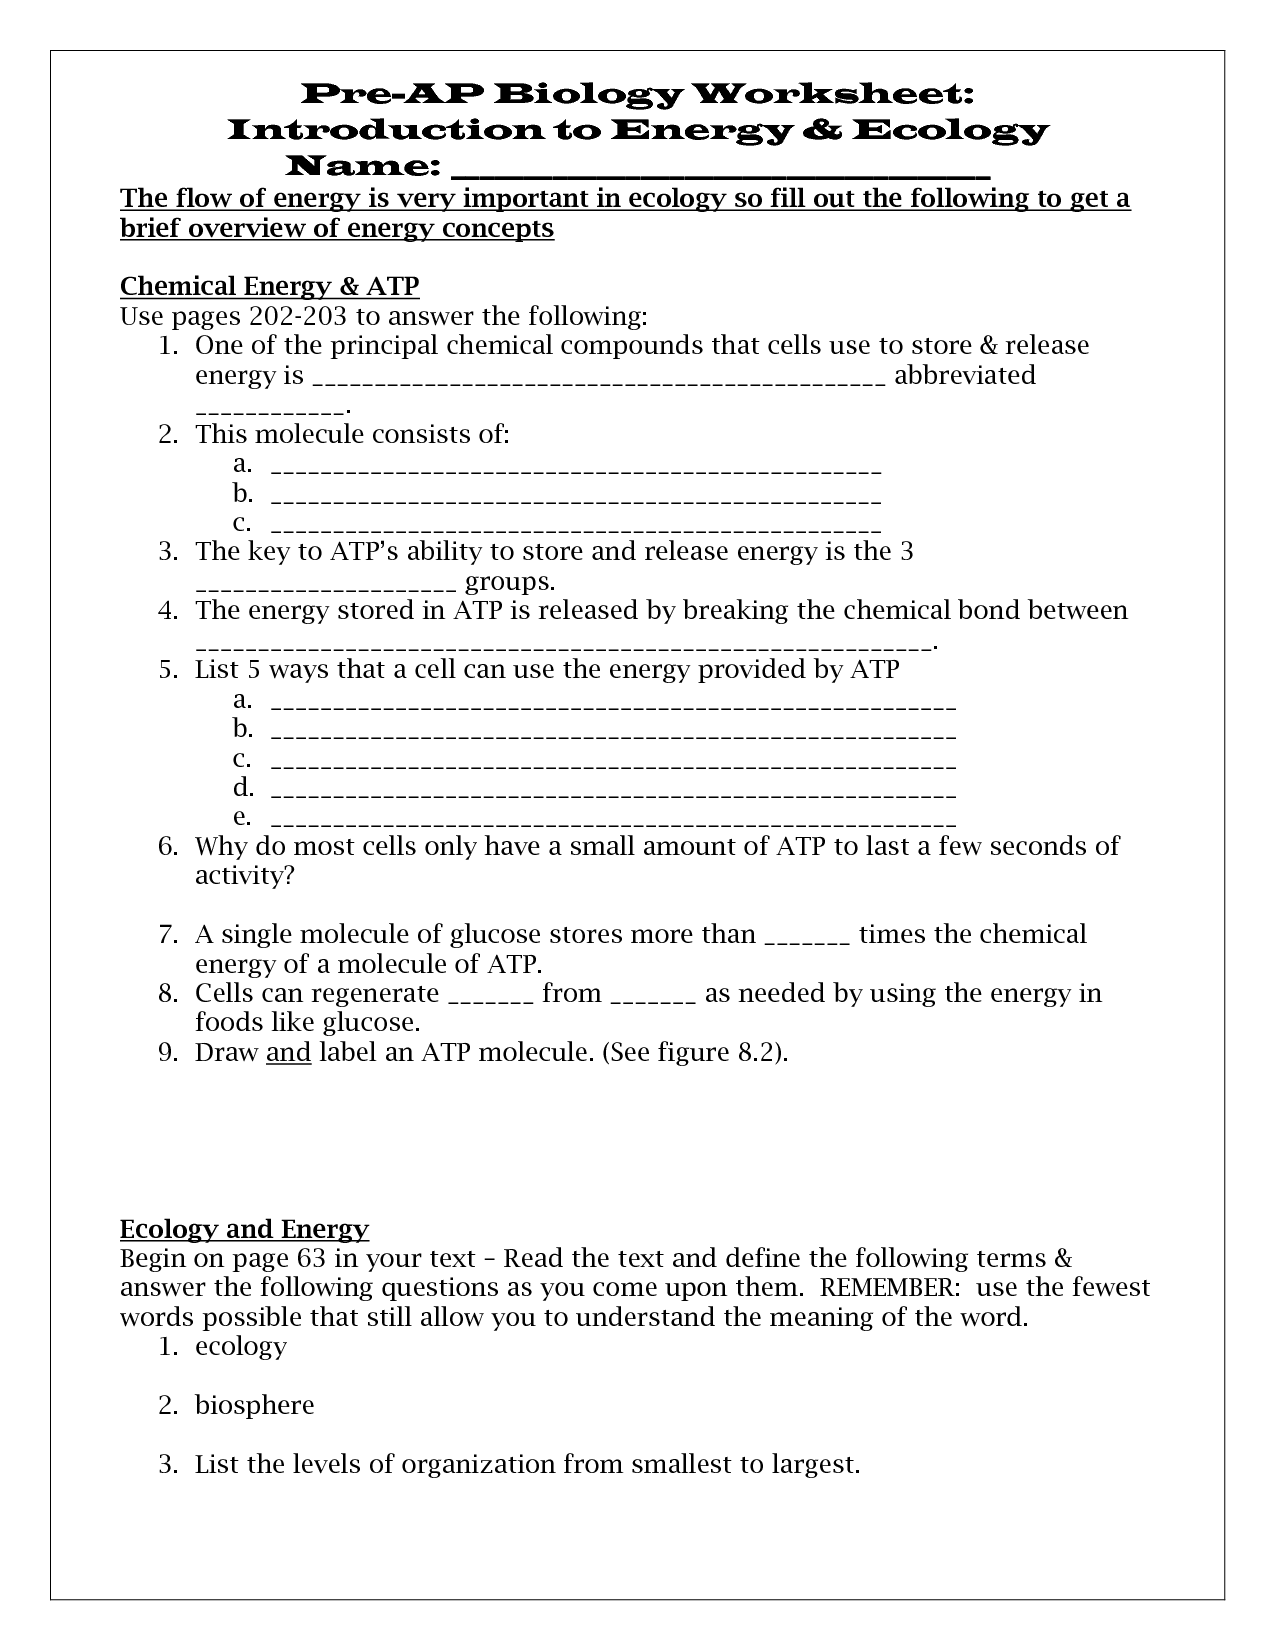 10 Best Images of Energy Flow Worksheets  Food Web Energy Pyramid Worksheet, Introduction to 